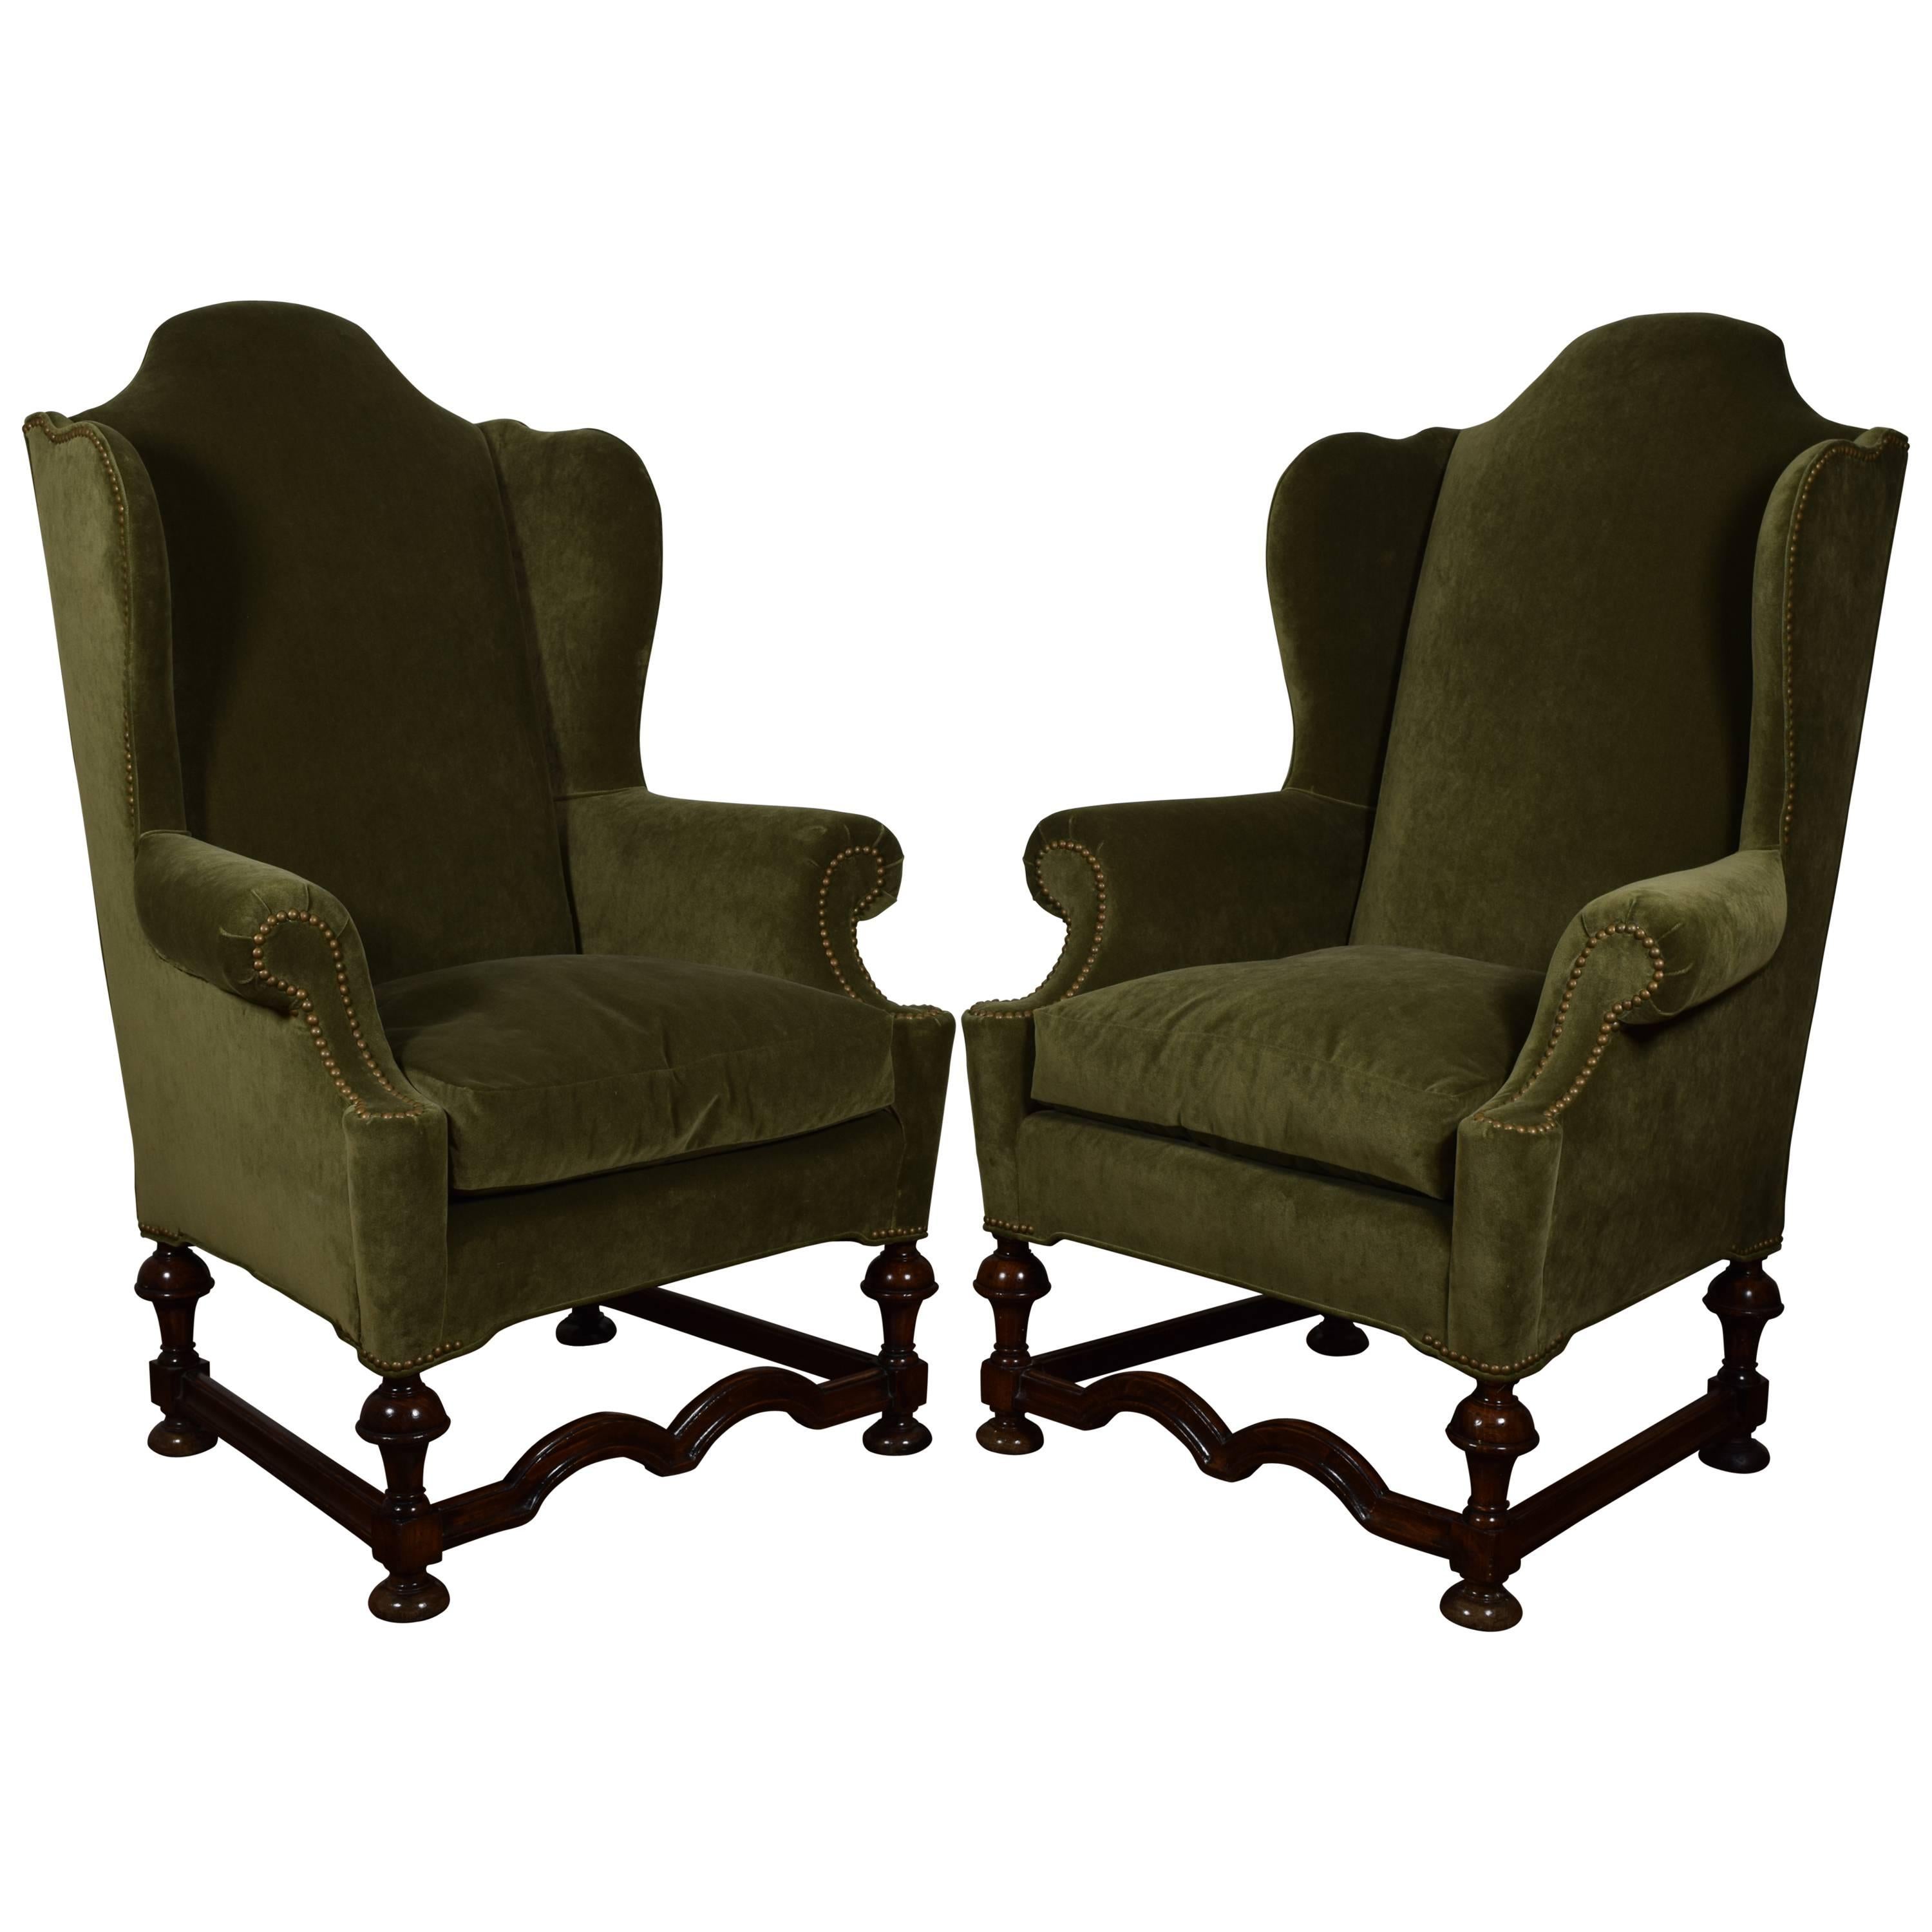 Pair of William & Mary Style Carved Wood & Upholstered Wing Chairs, 19th Century